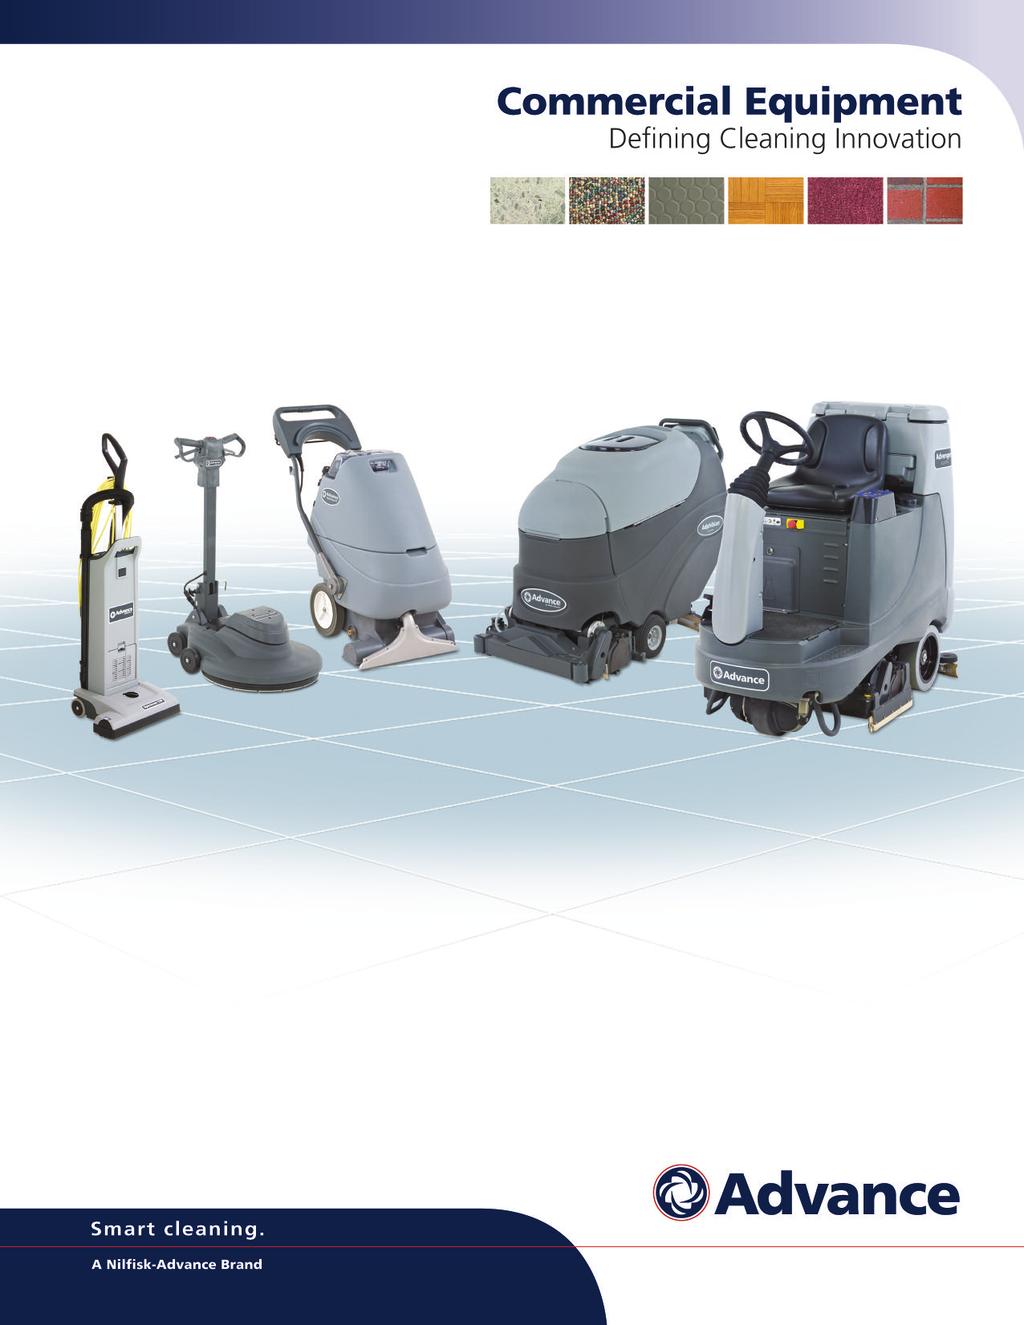 Upright Vacuums & Rider Vacuum Canister & Specialty Vacuums Extractors / Carpet Equipment Sweepers Floor Machines Burnishers